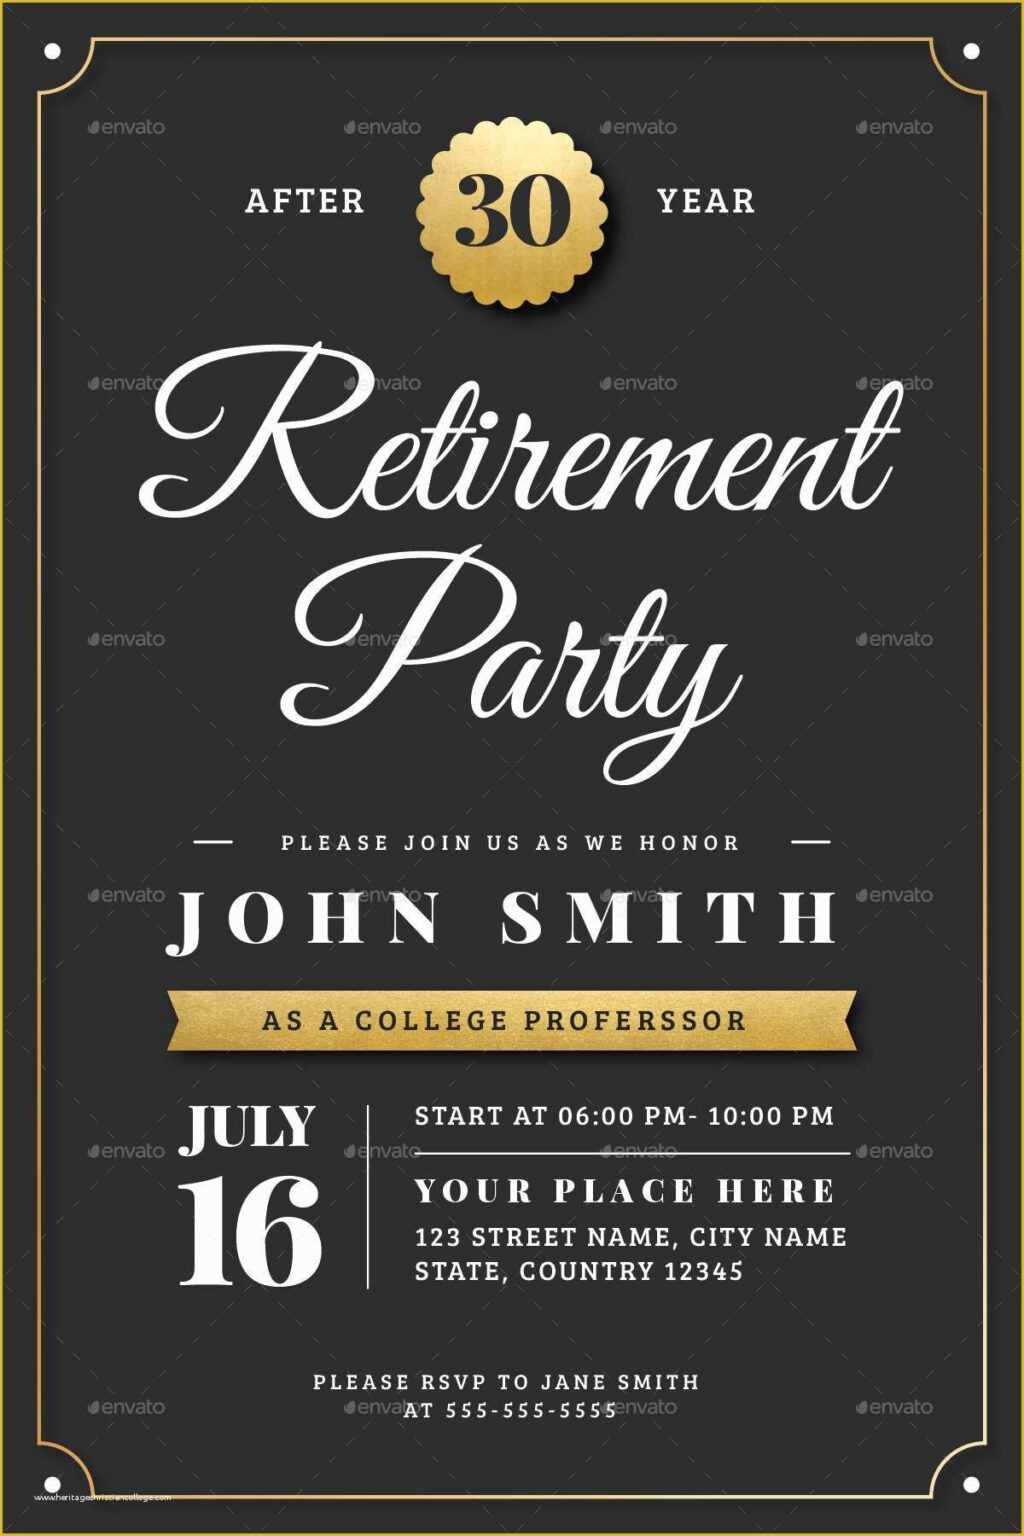 032 Retirement Party Announcement Template Free Of Gold throughout